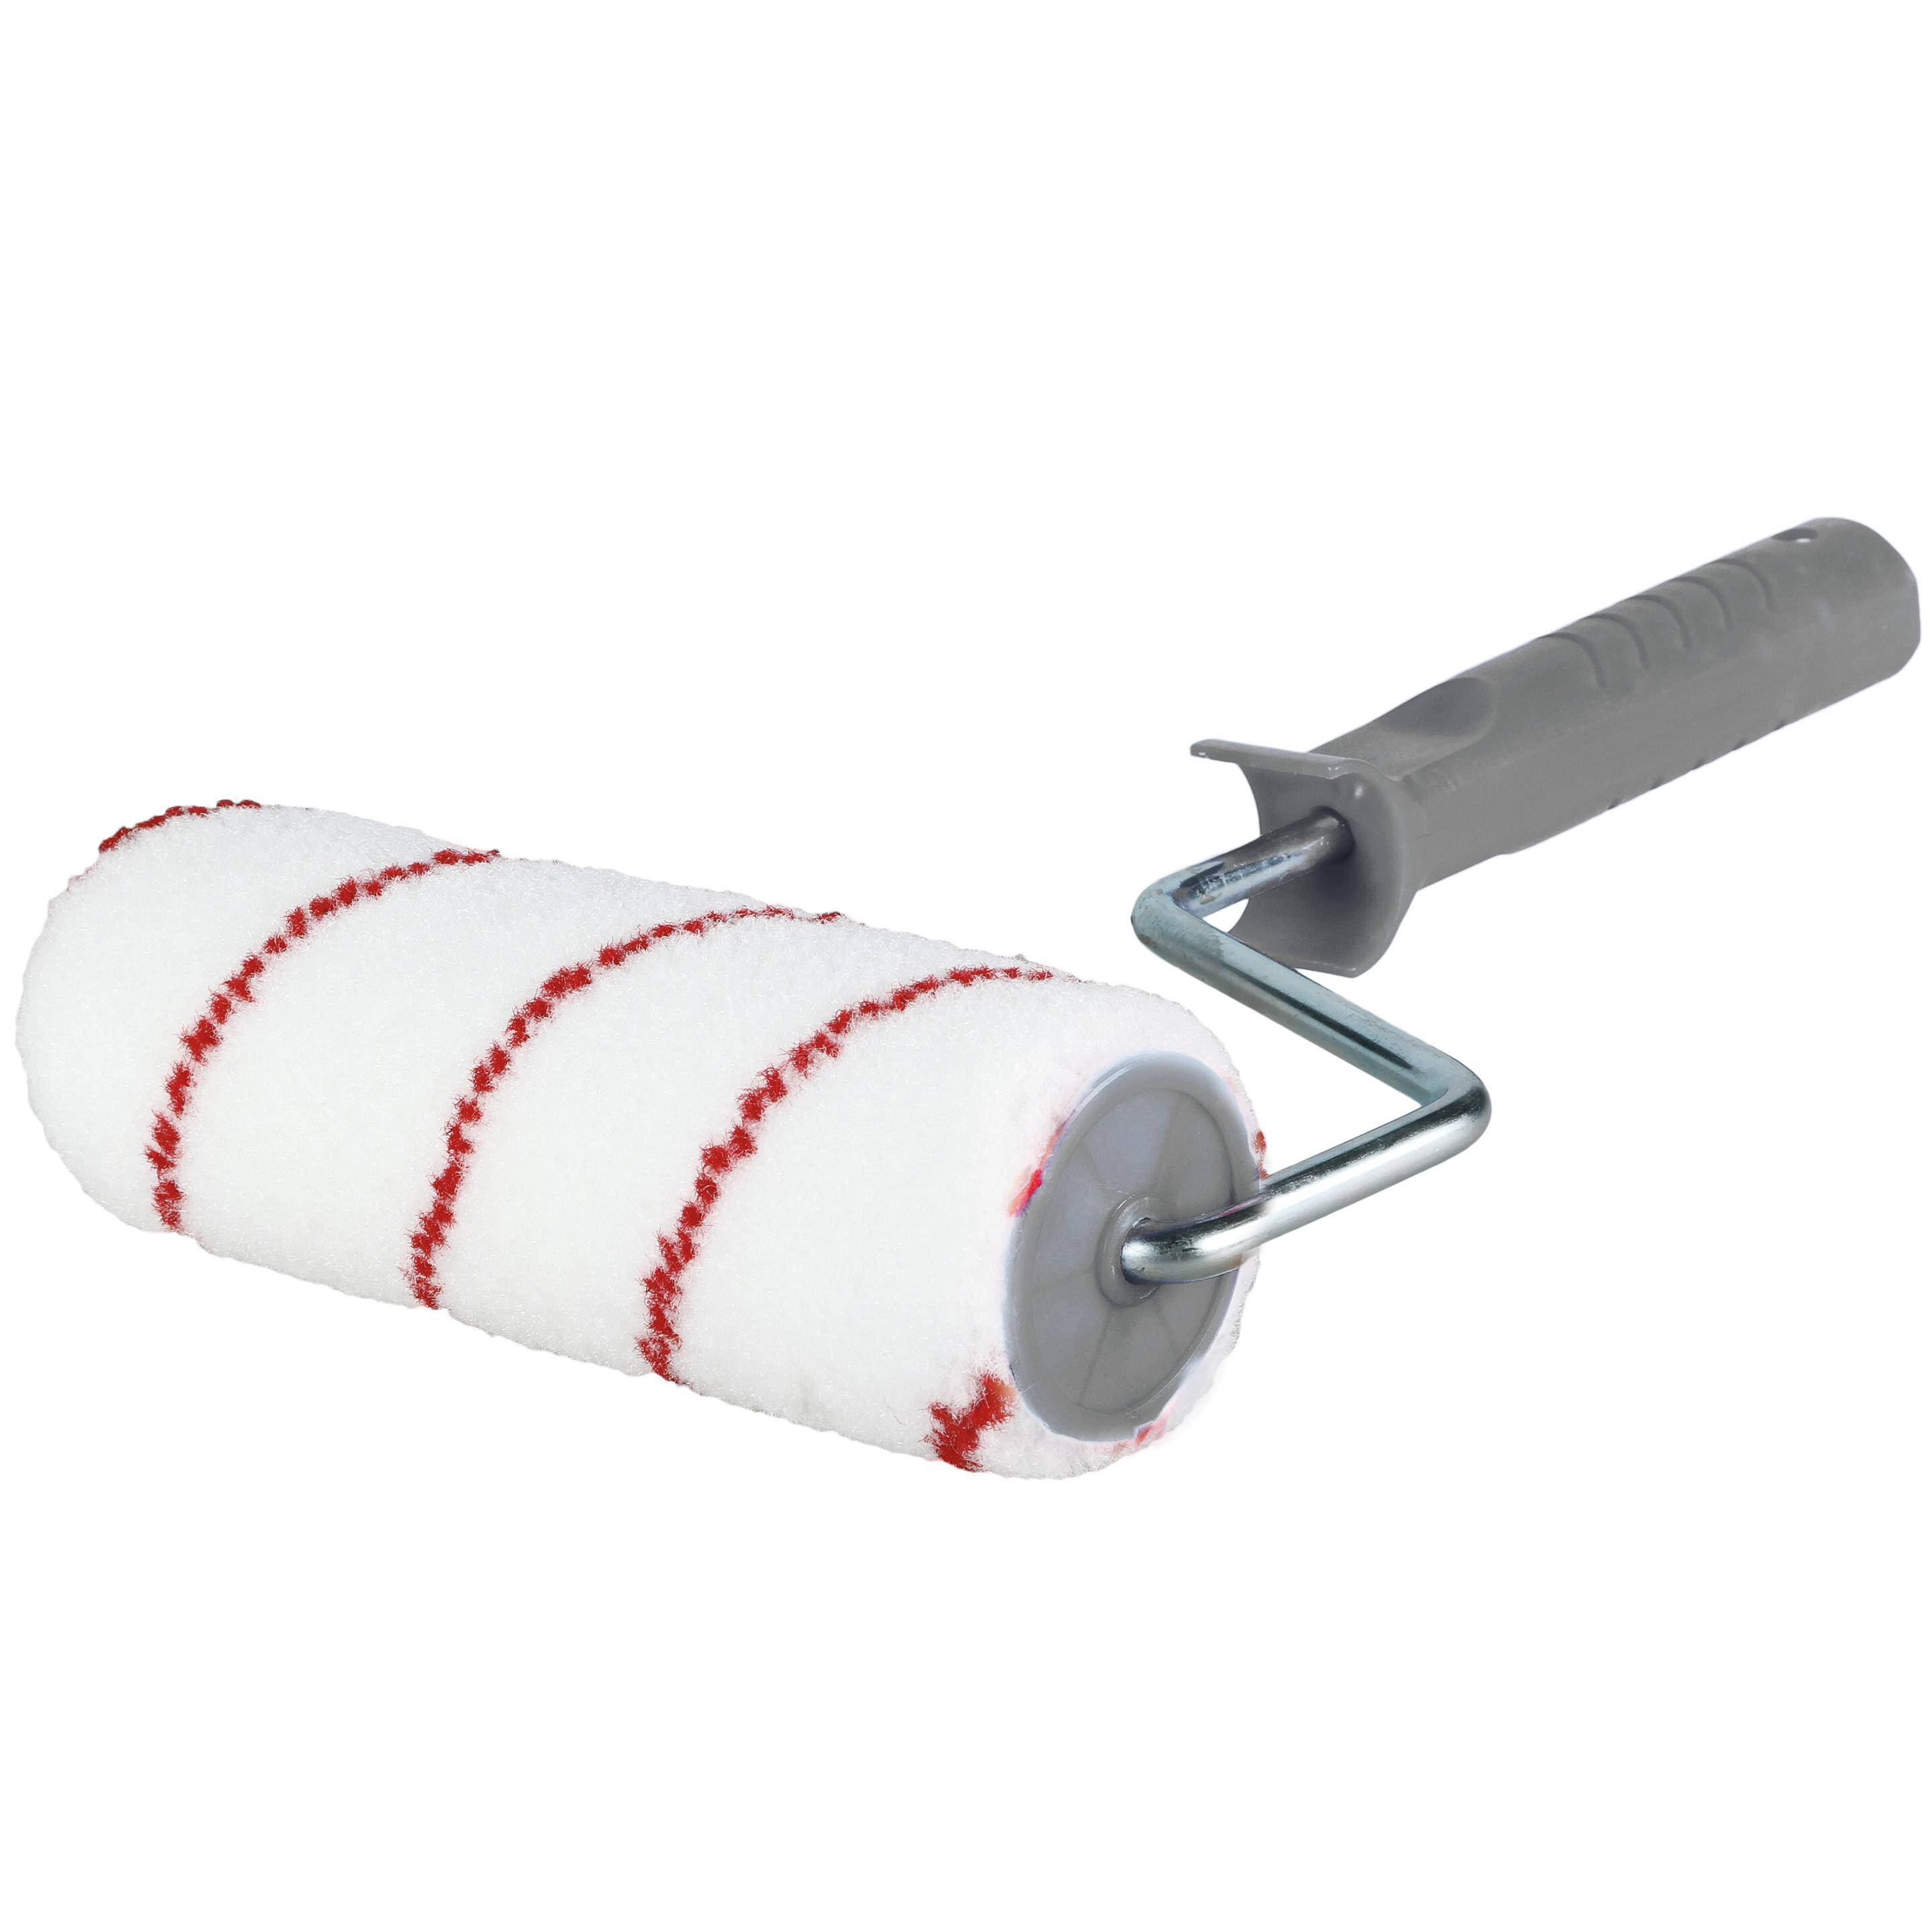 NYLON roller complete with frame 25 CM